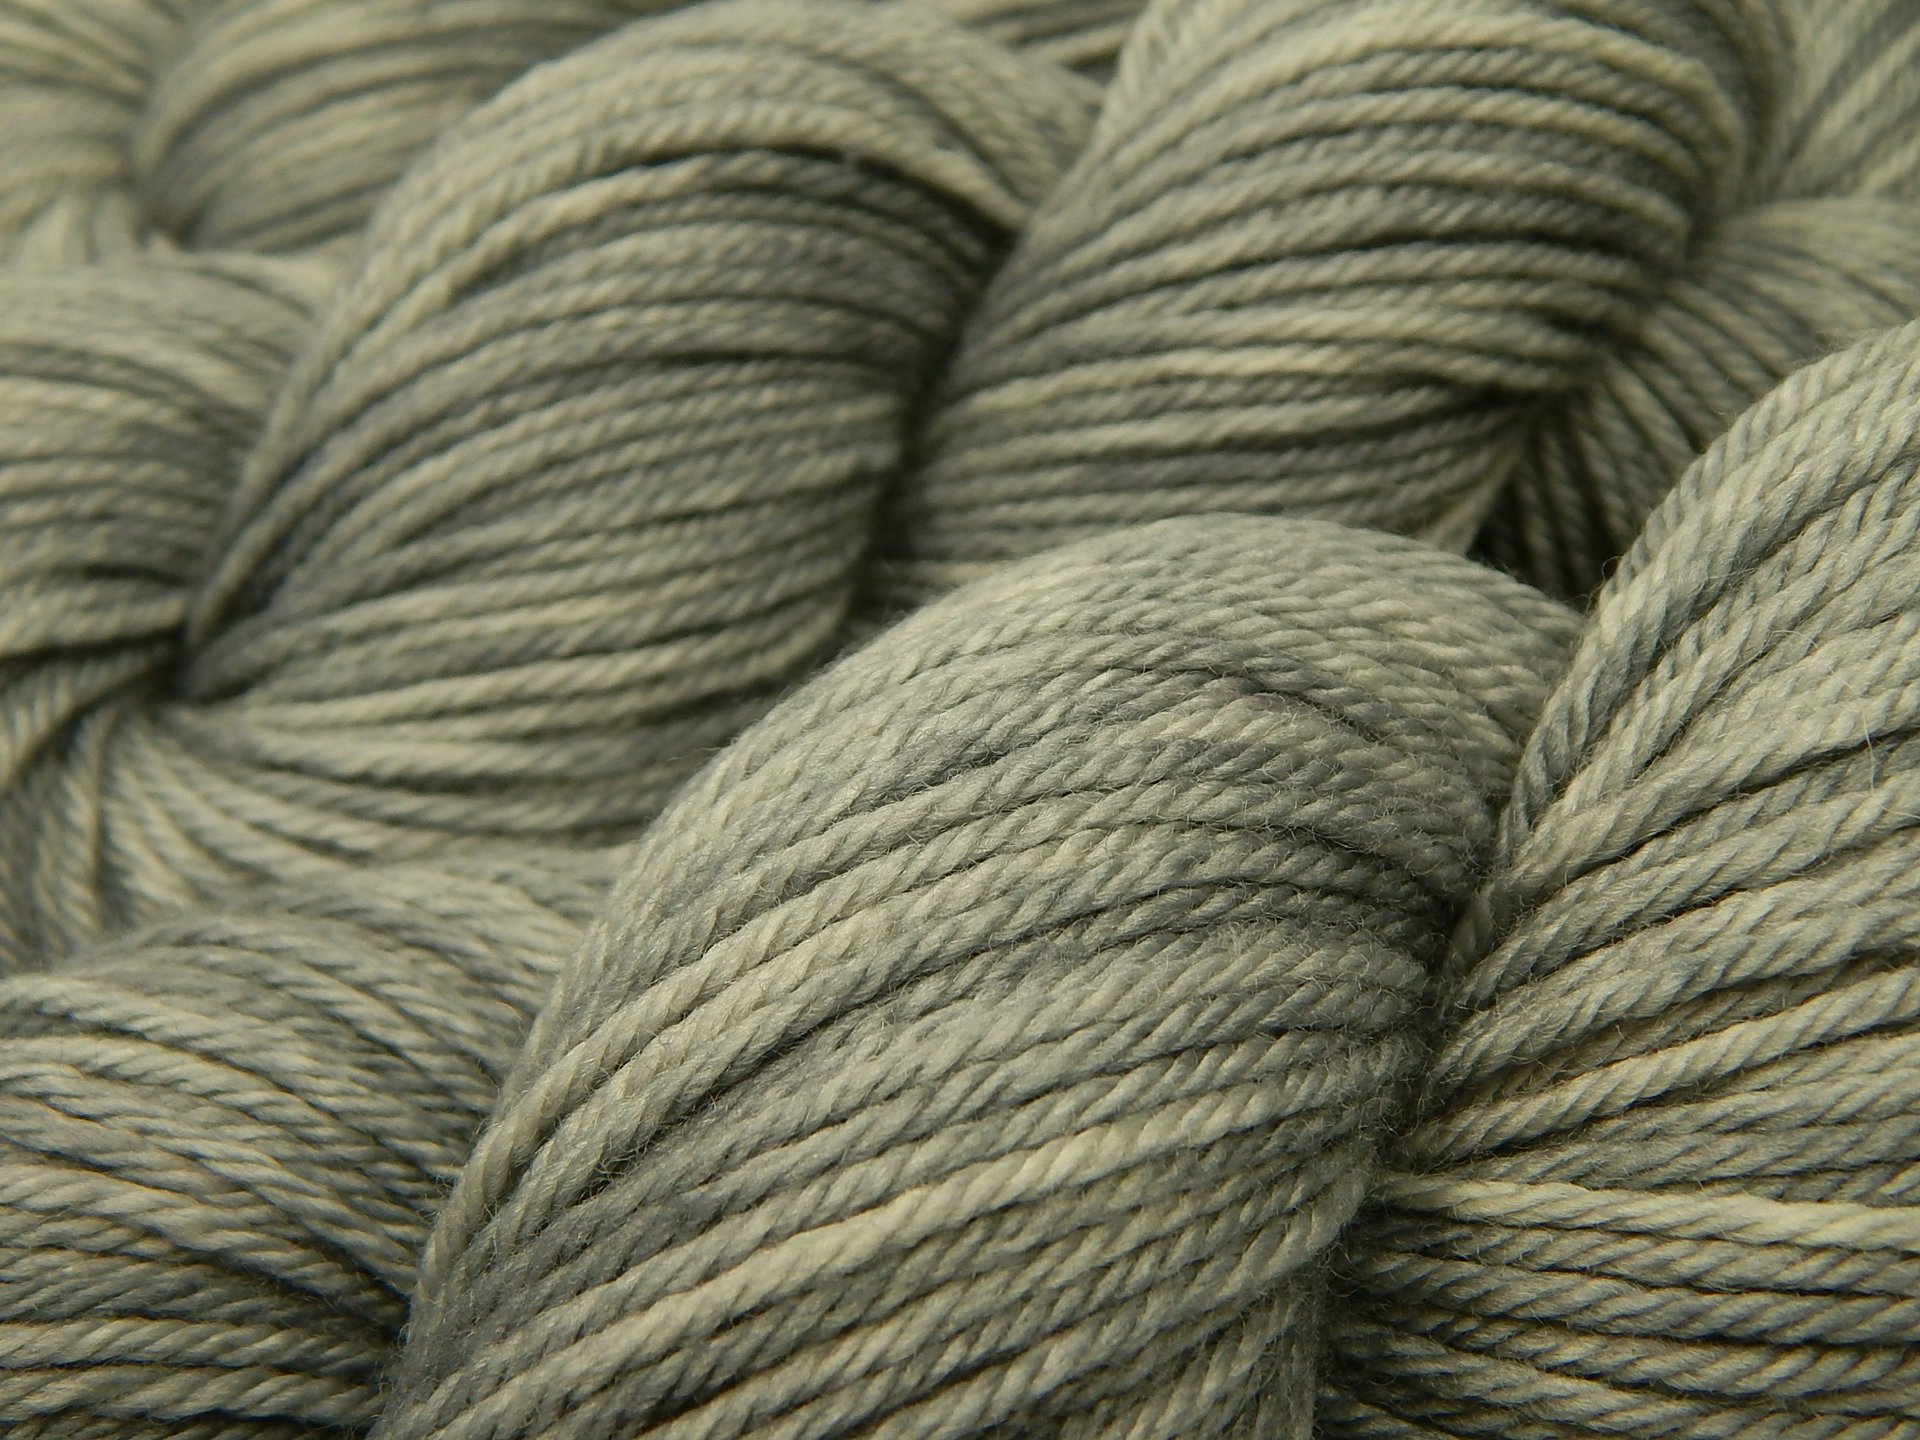 Hand Dyed Yarn, Worsted Weight Superwash Merino Wool - Silver Lining - Soft Indie Dyed Light Grey Gray Tonal Knitting Yarn, Neutral Color